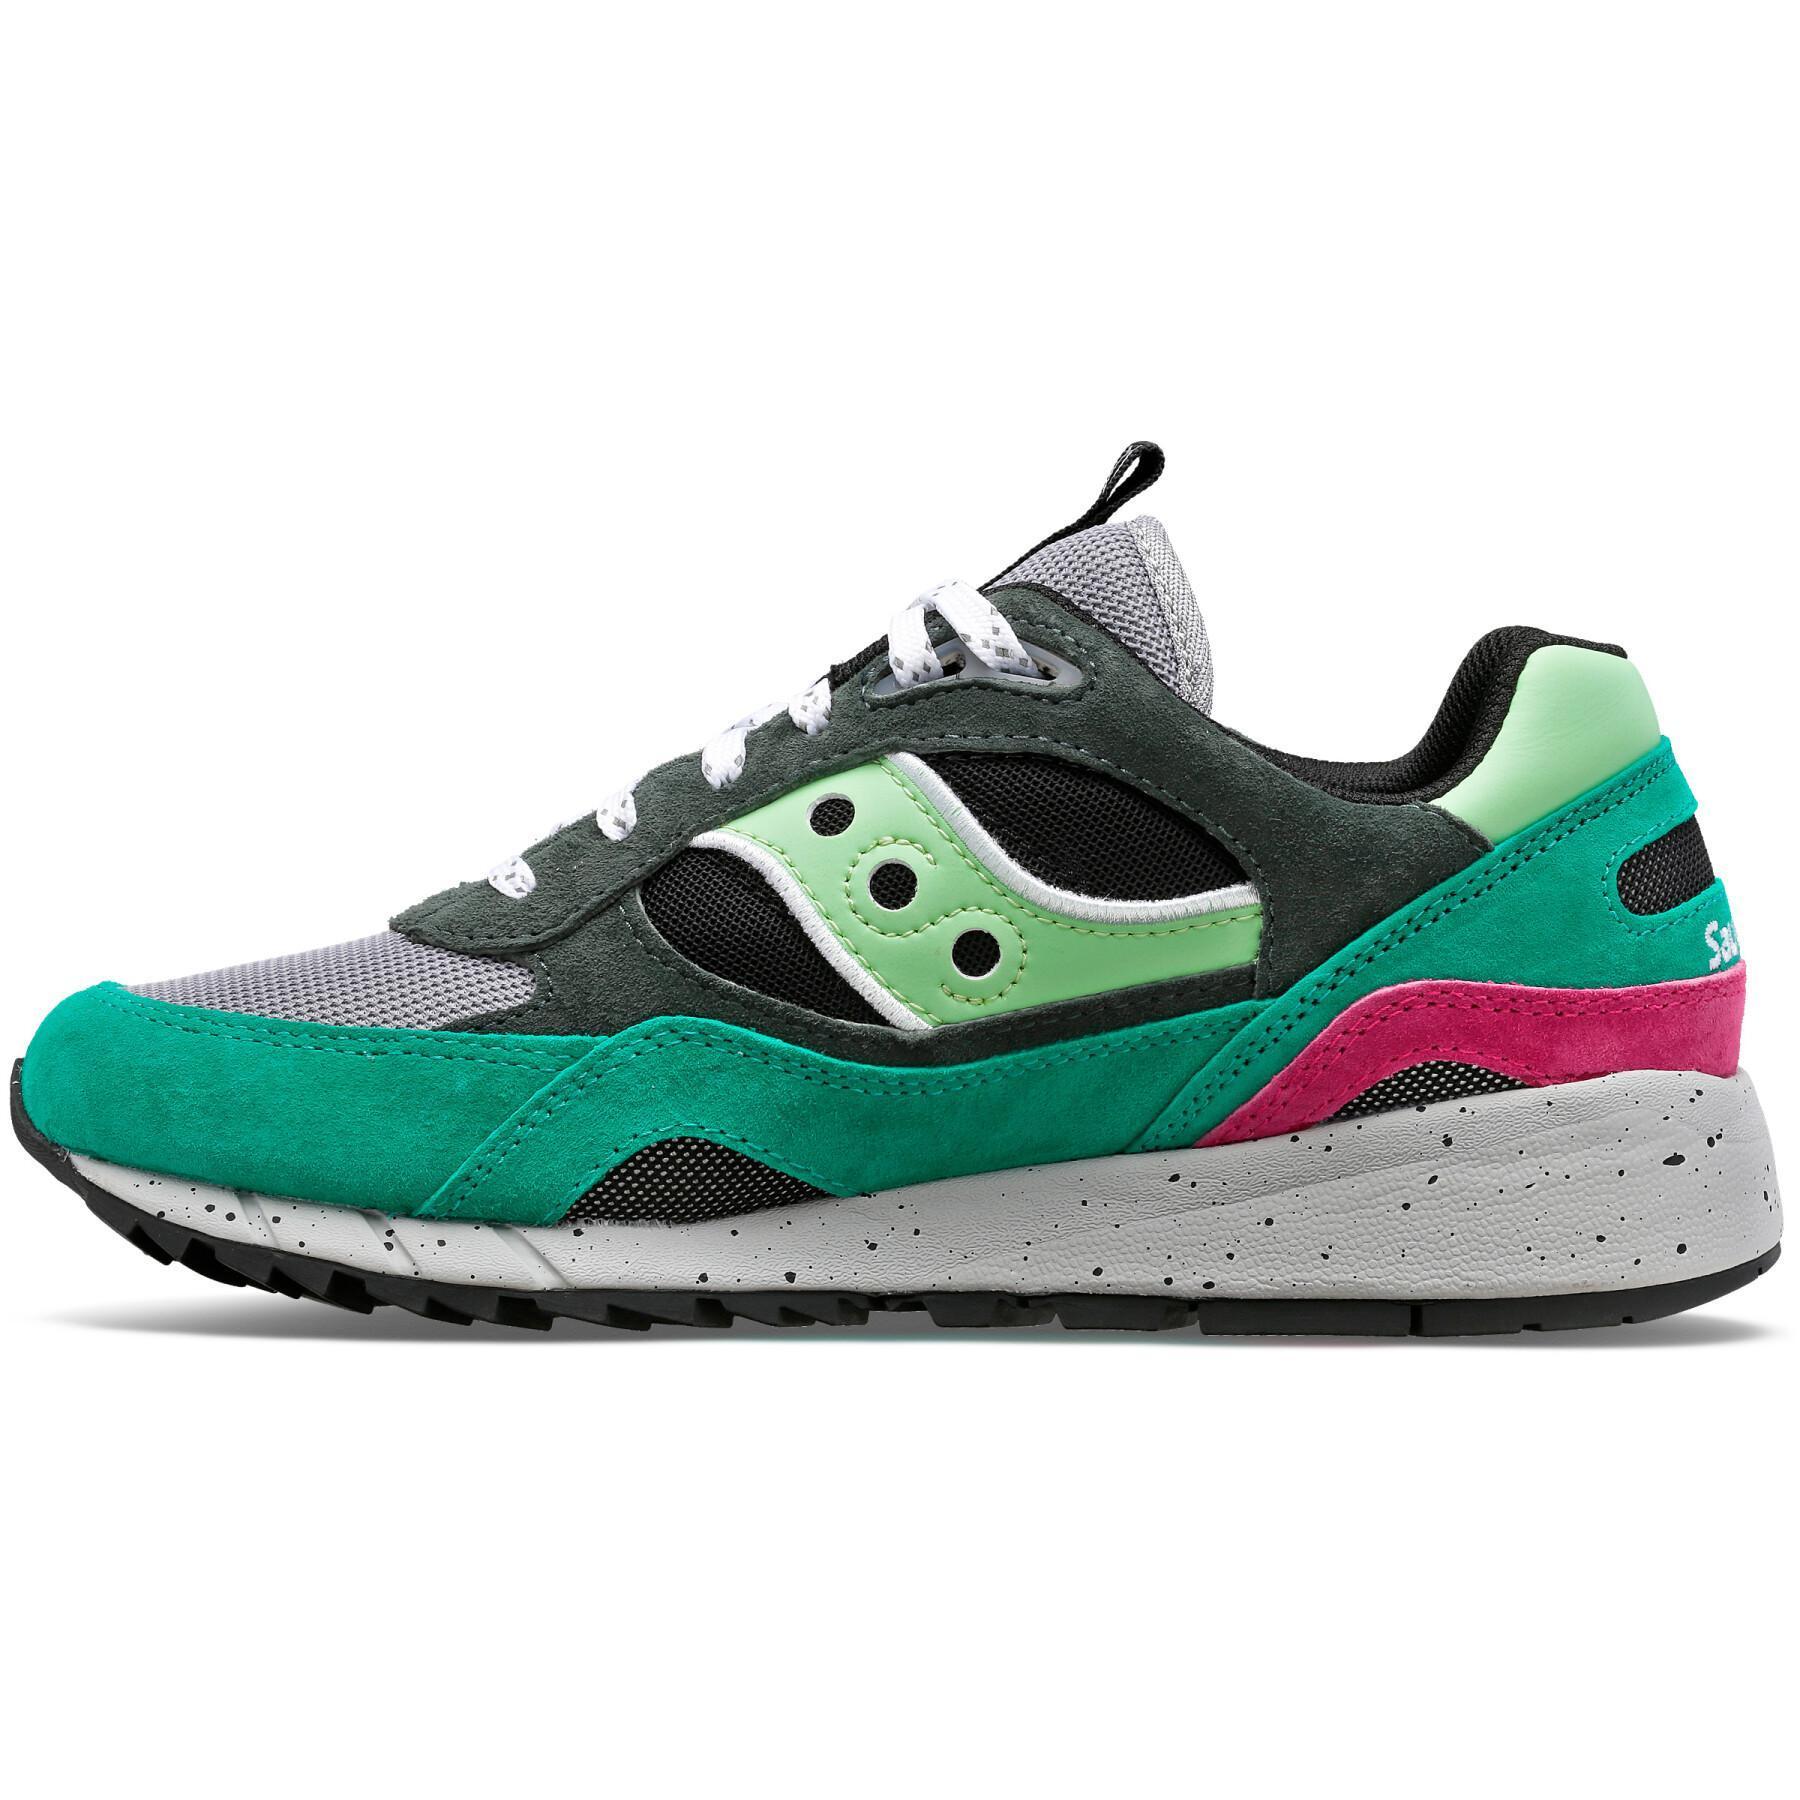 Chaussures Saucony Shadow 6000